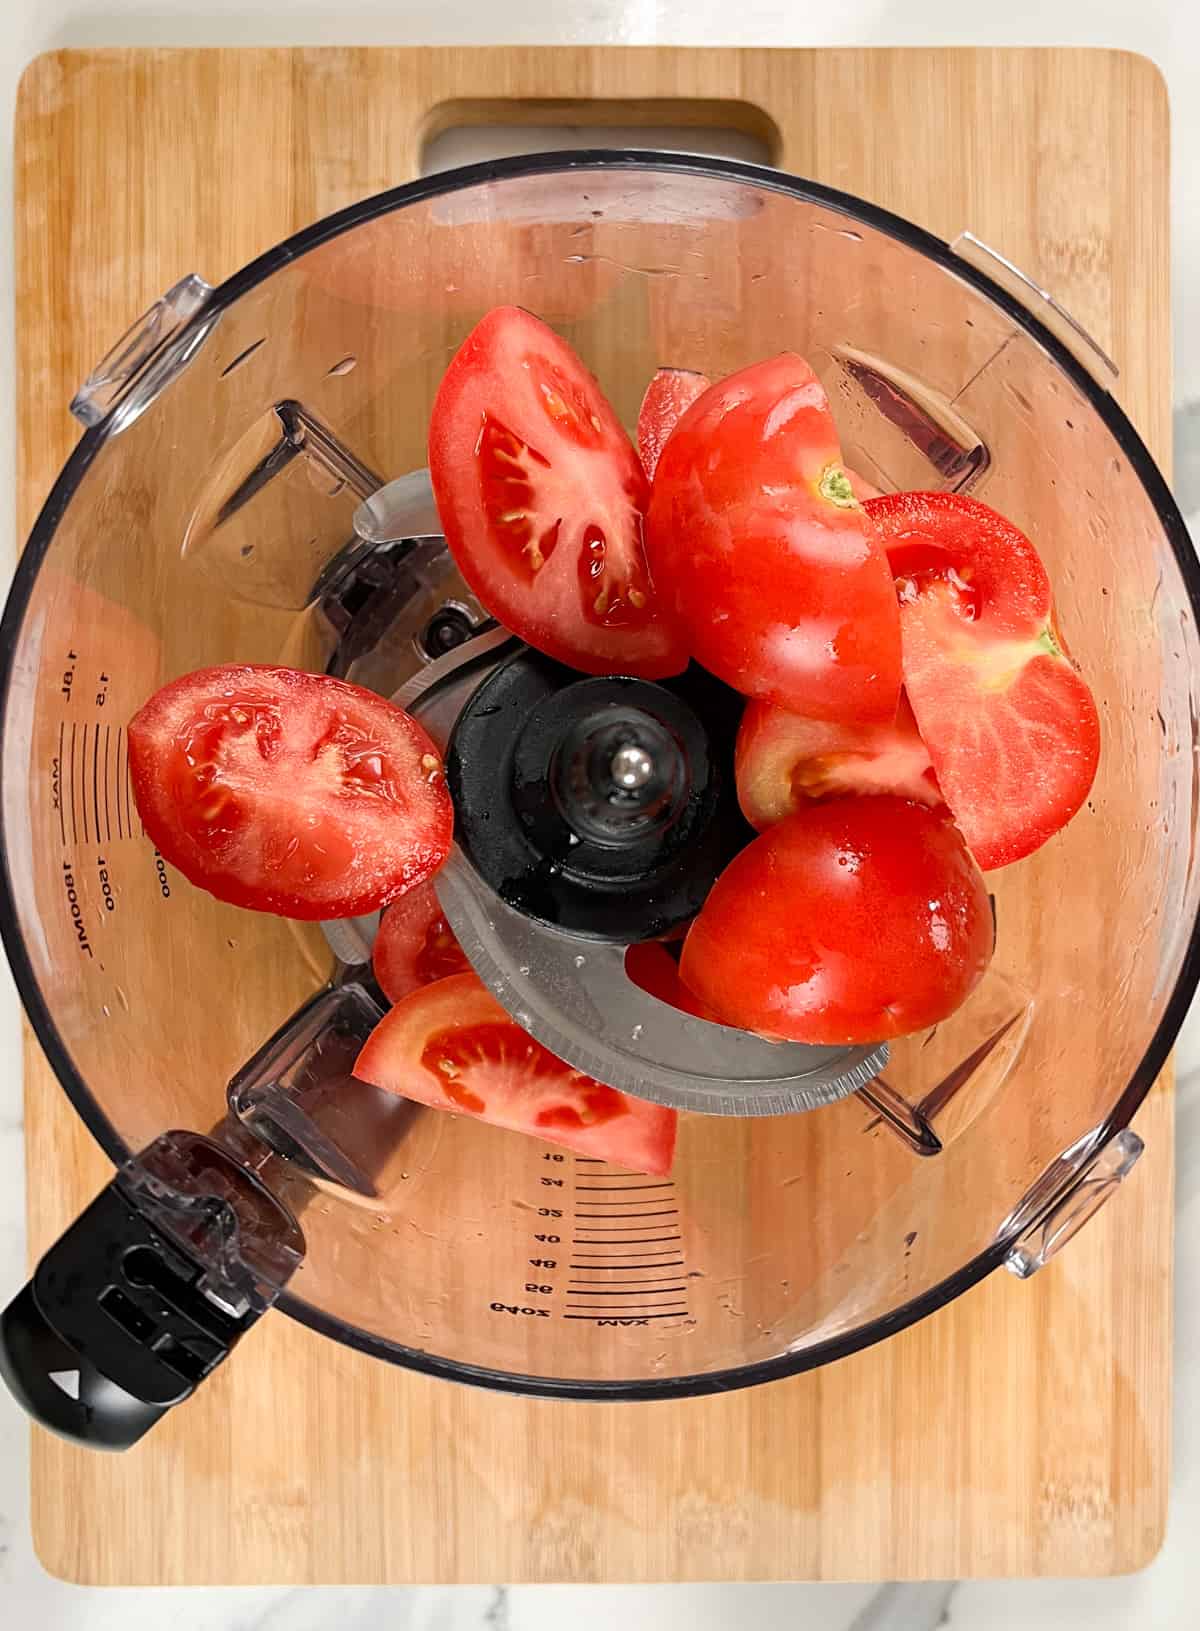 wedges of tomato in a food processor jug